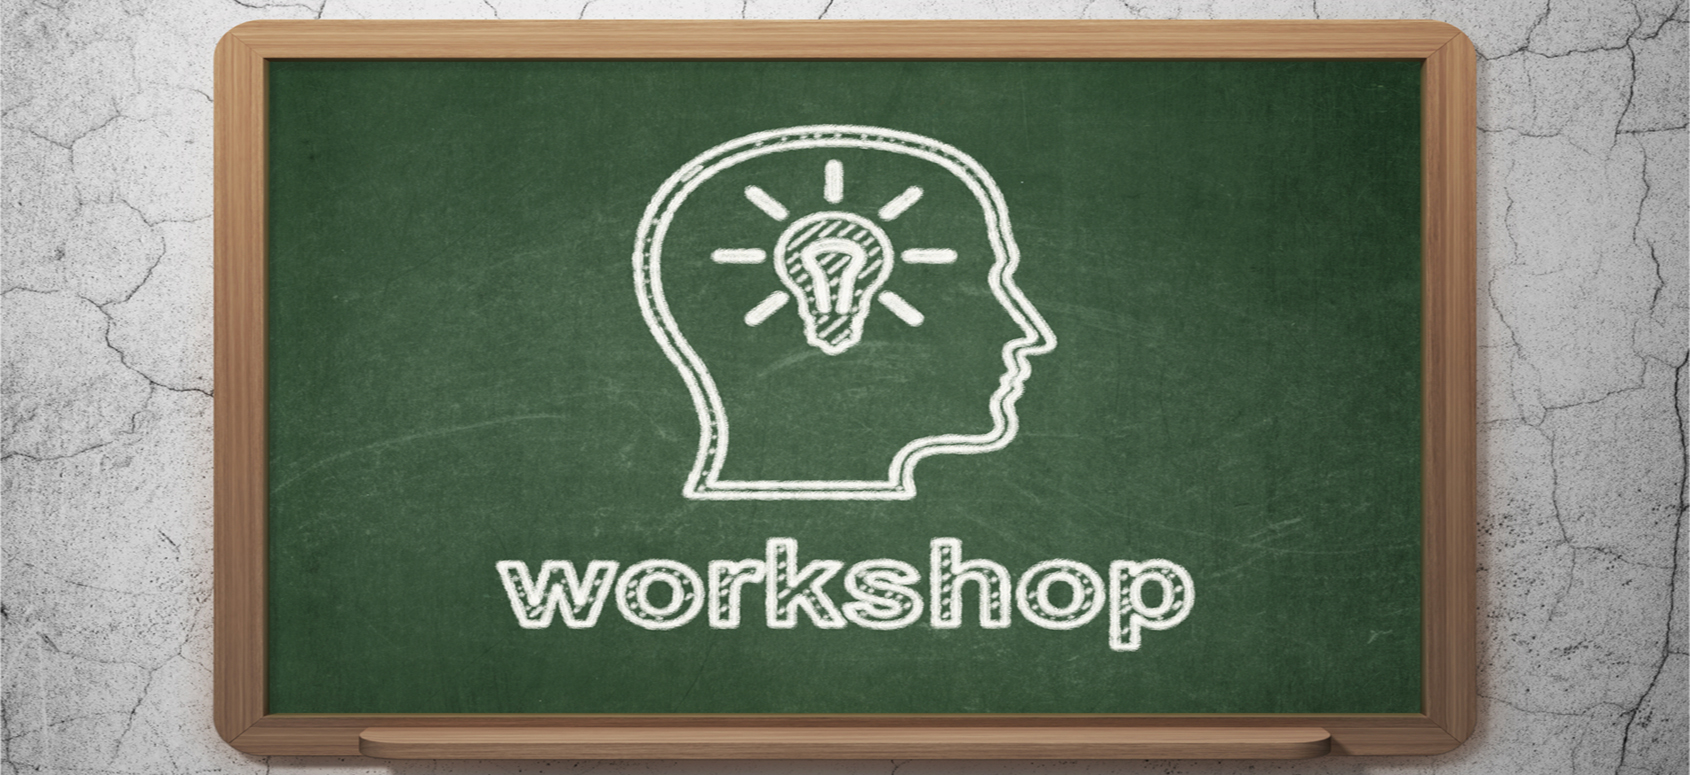 The 5 best times to hire school workshops